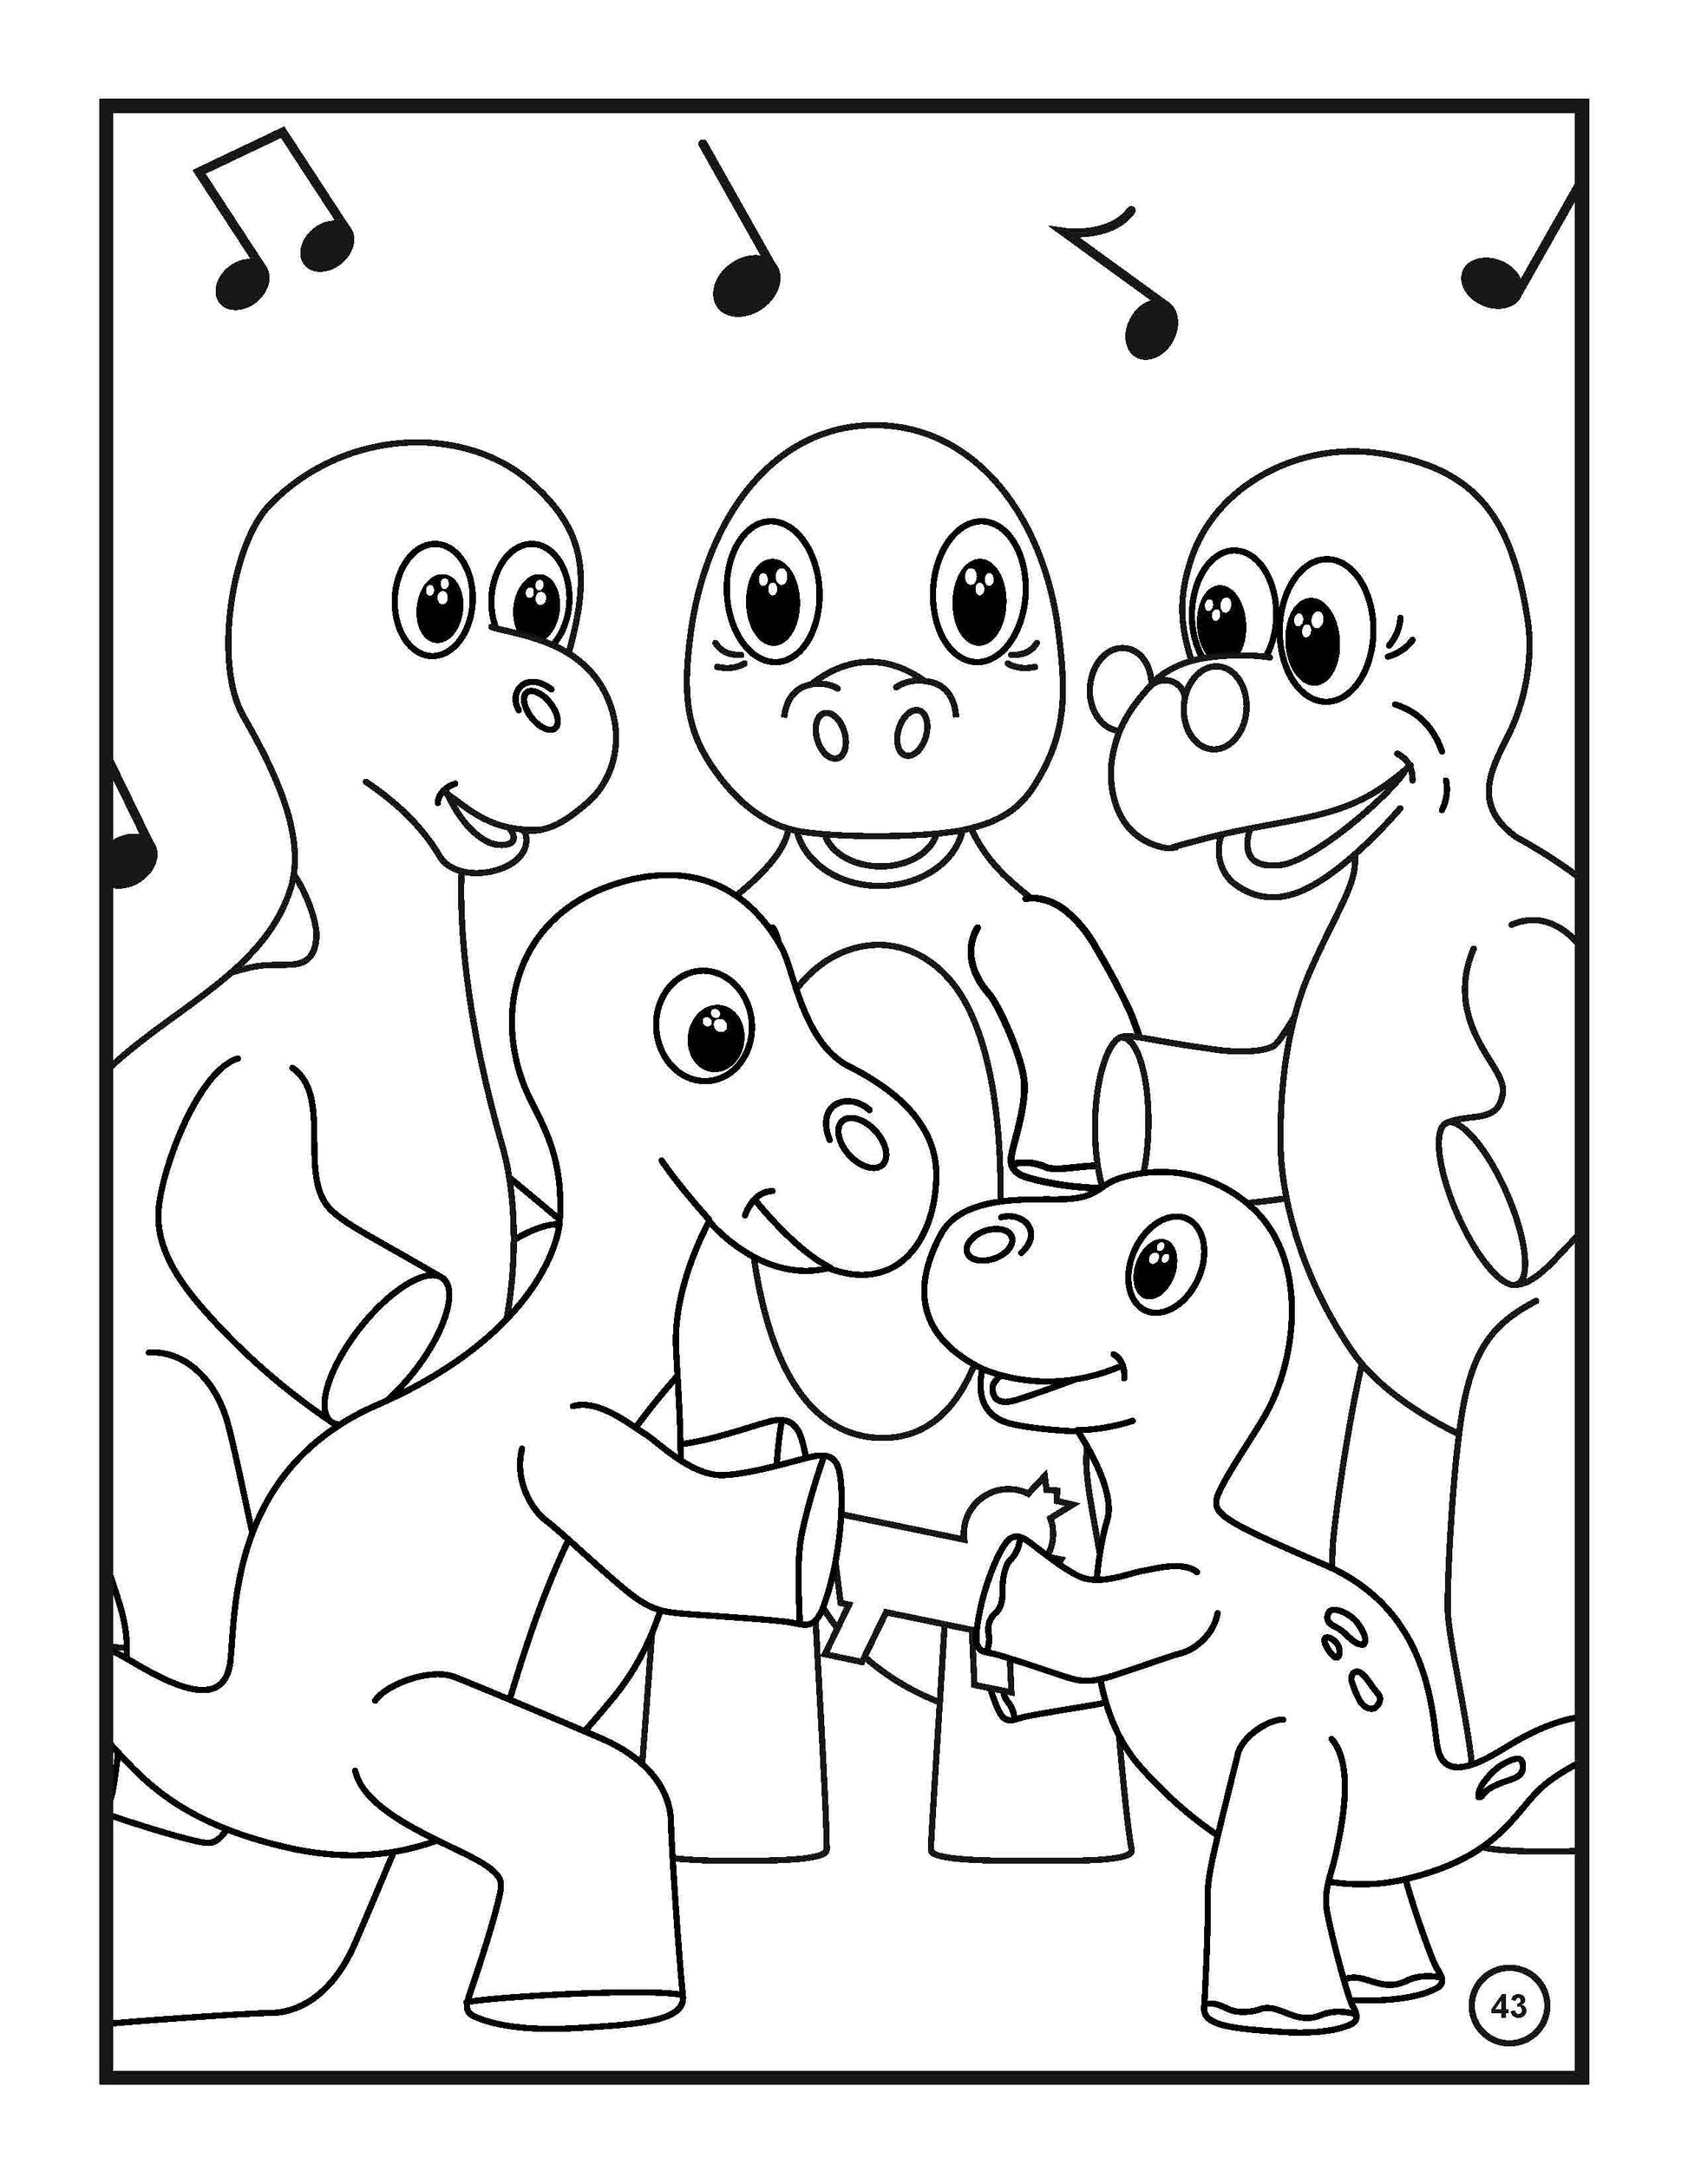 Coloring page showing a group of five happy cartoon dinosaurs of different sizes, joyfully interacting with each other. Musical notes float above them, suggesting they are singing or enjoying music. One of the dinosaurs is smiling and giving a gift to another, which adds to the cheerful atmosphere of the scene. 